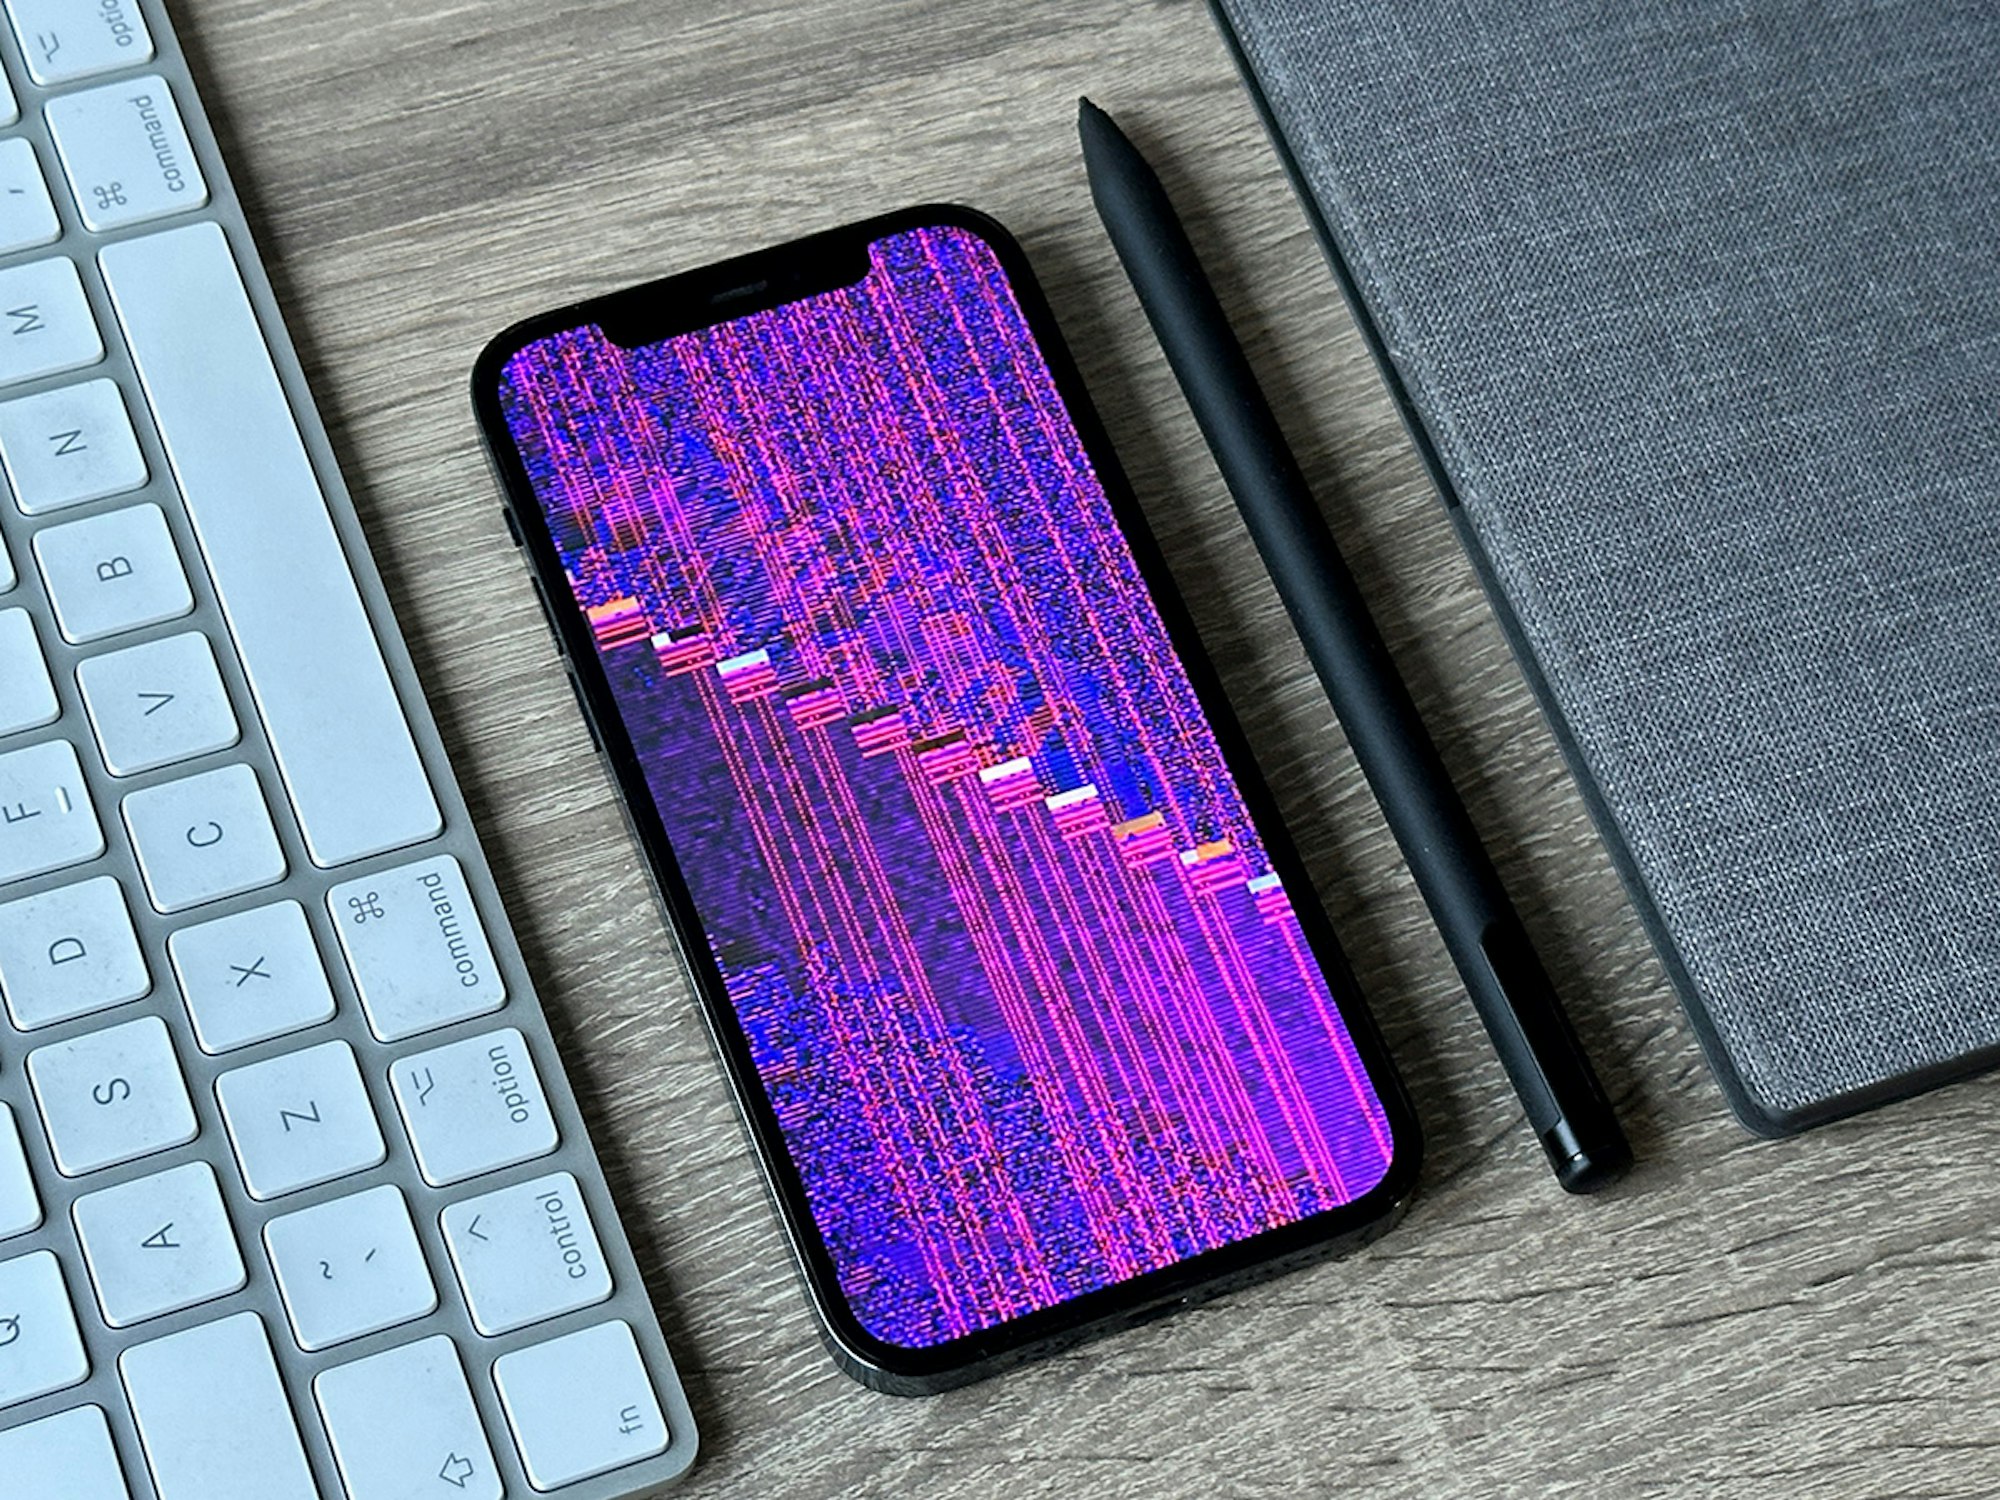 Why Is My Phone Glitching? Common Reasons and How to Fix Them